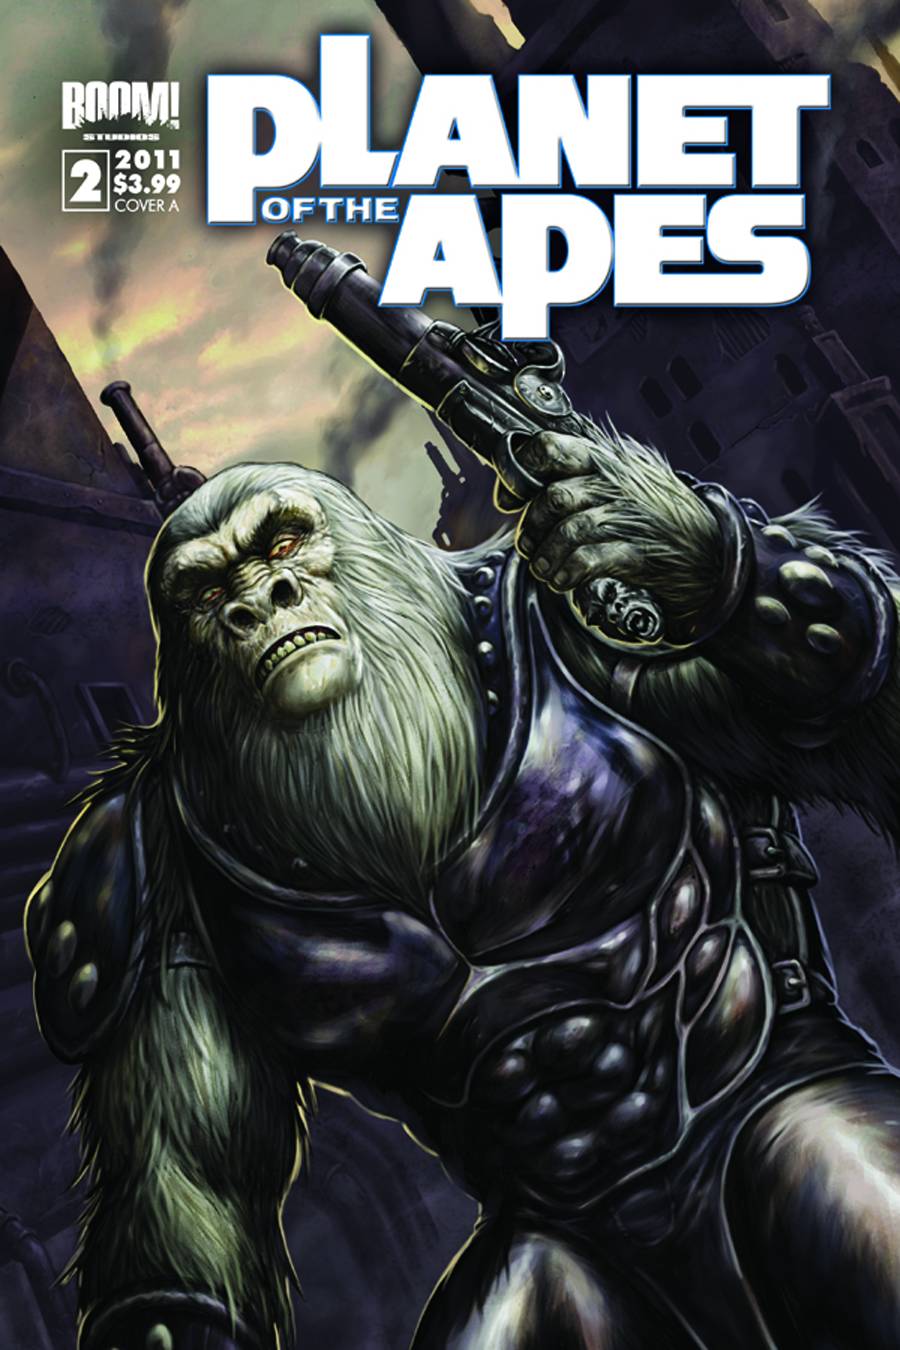 Planet of the Apes #2